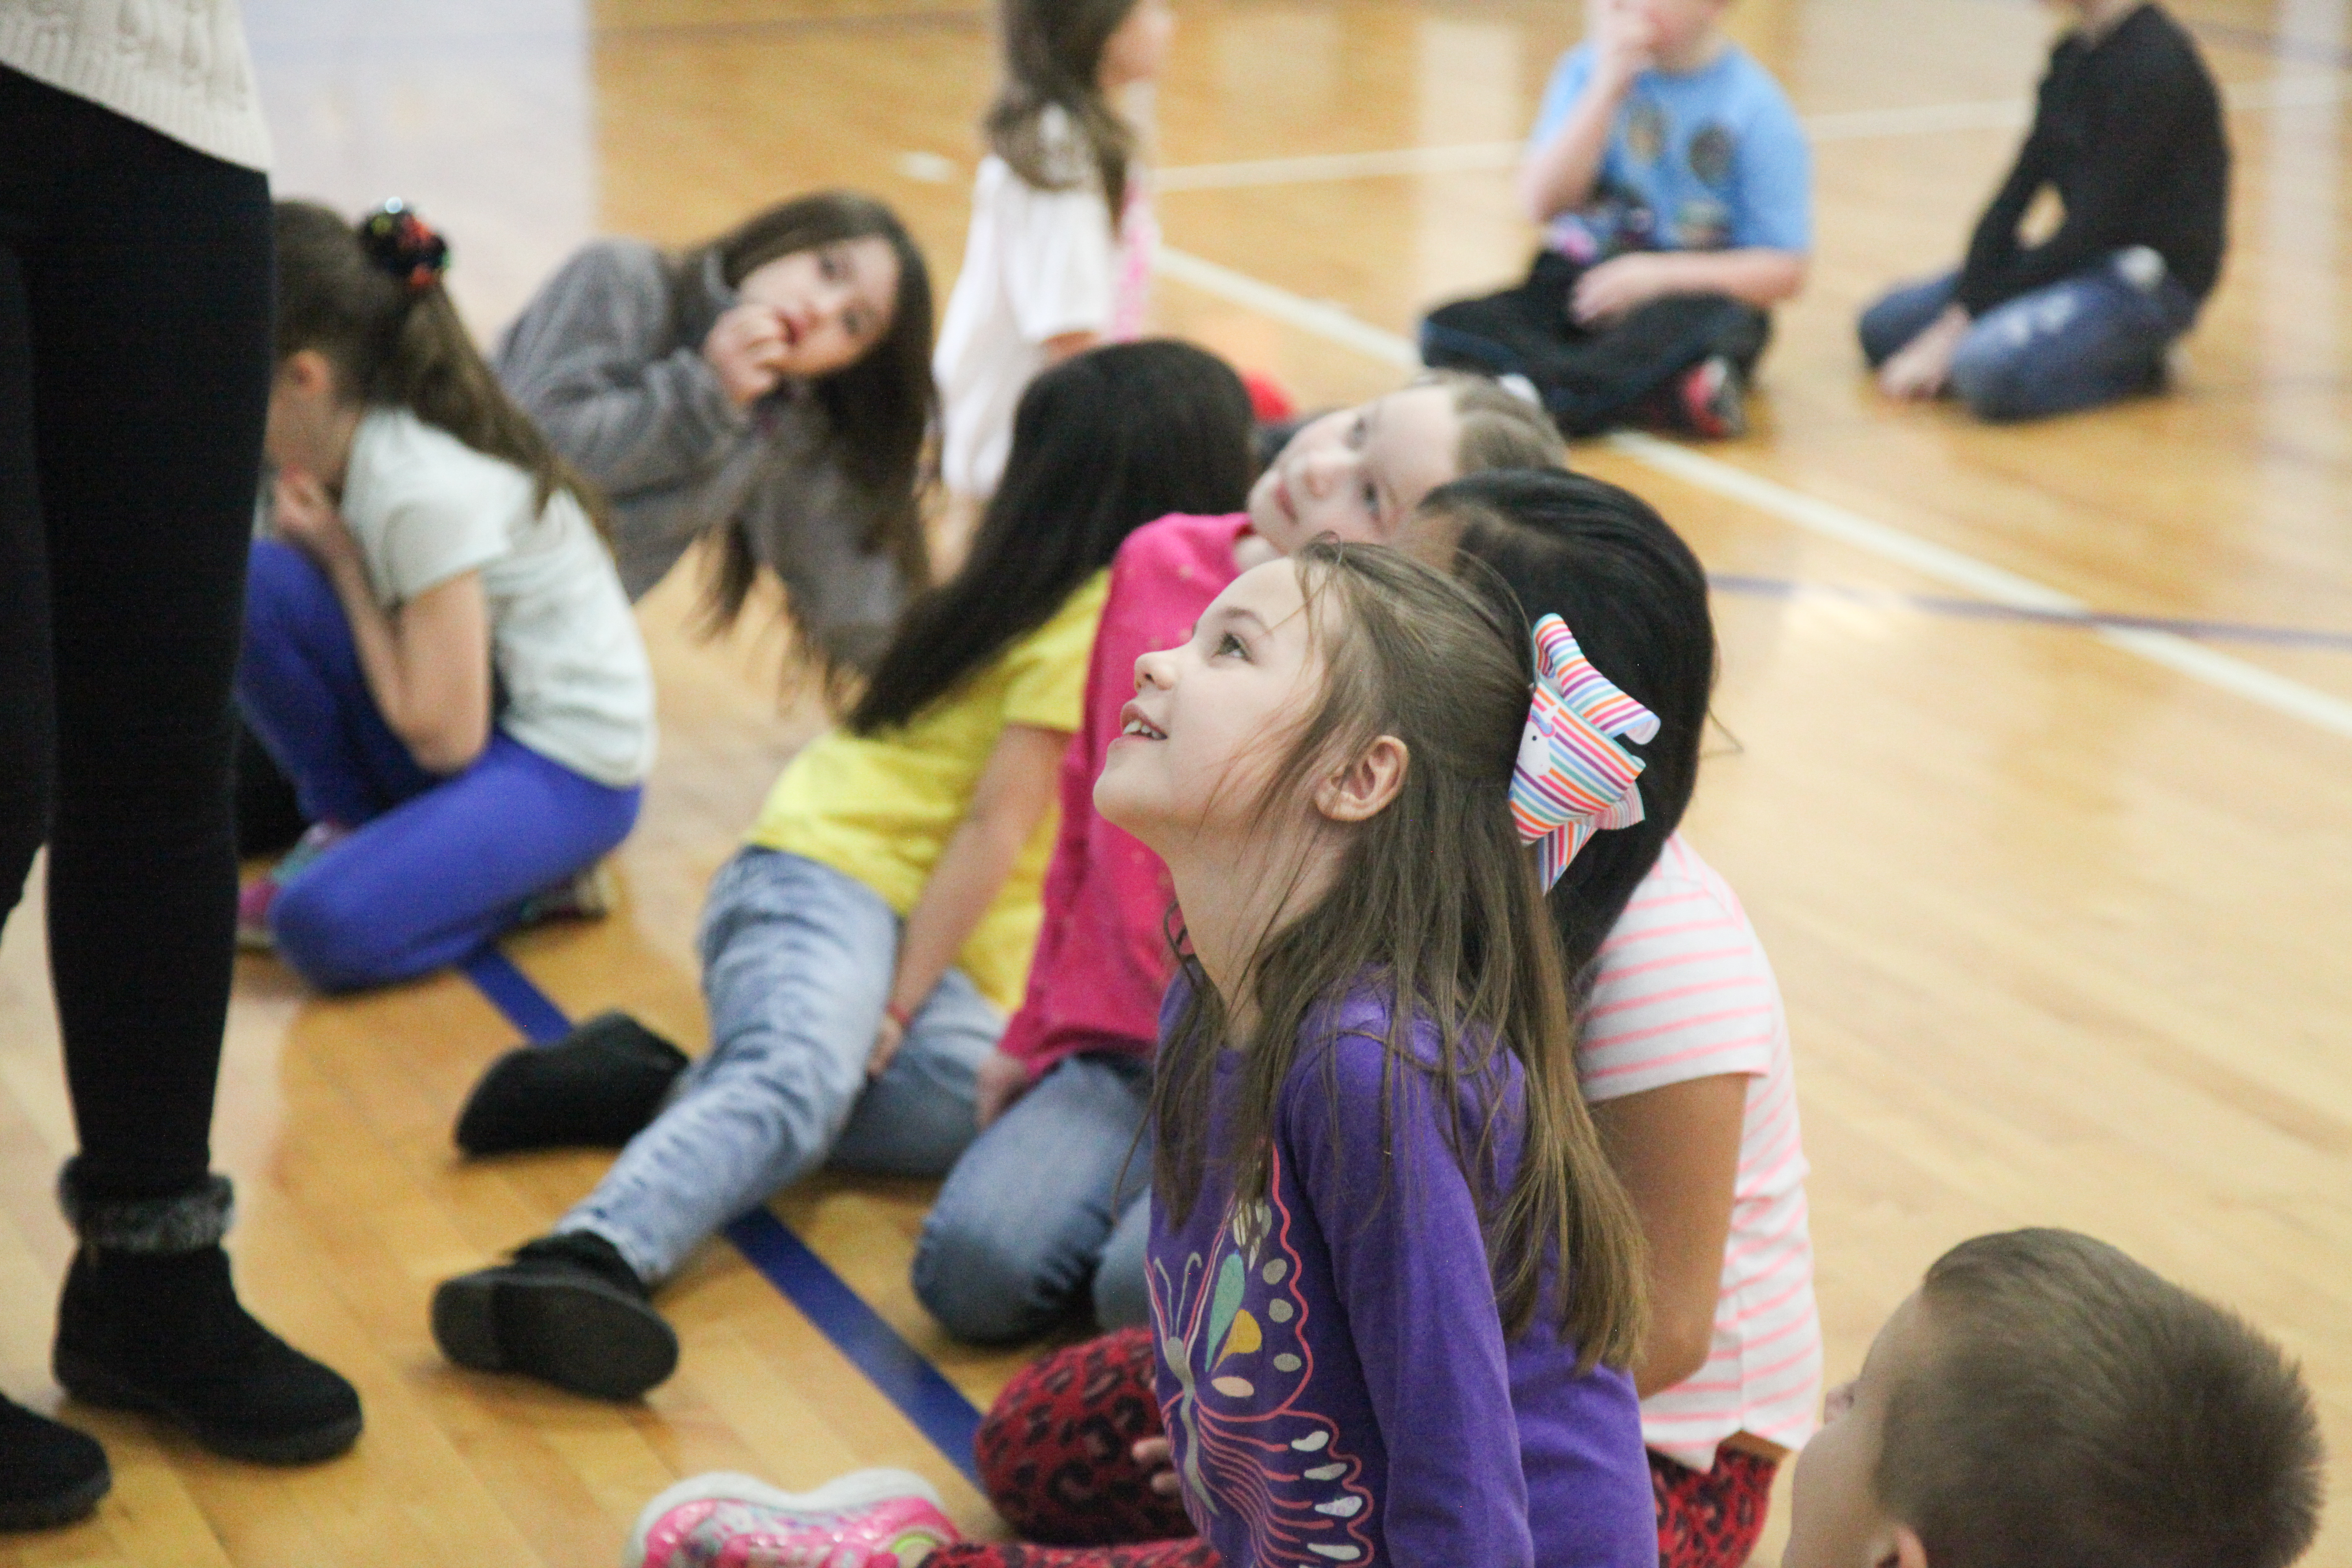 At Huntertown, teachers cultivate positive relationships in every learning setting. Third-grader Lila Slade, center, and her classmates focus on learning while taking a memory moment during Chinese lessons in physical education class.The students watch their Chinese teacher act out different actions while they say what she is doing in Chinese. Photo by Megan Gross, March 14, 2019